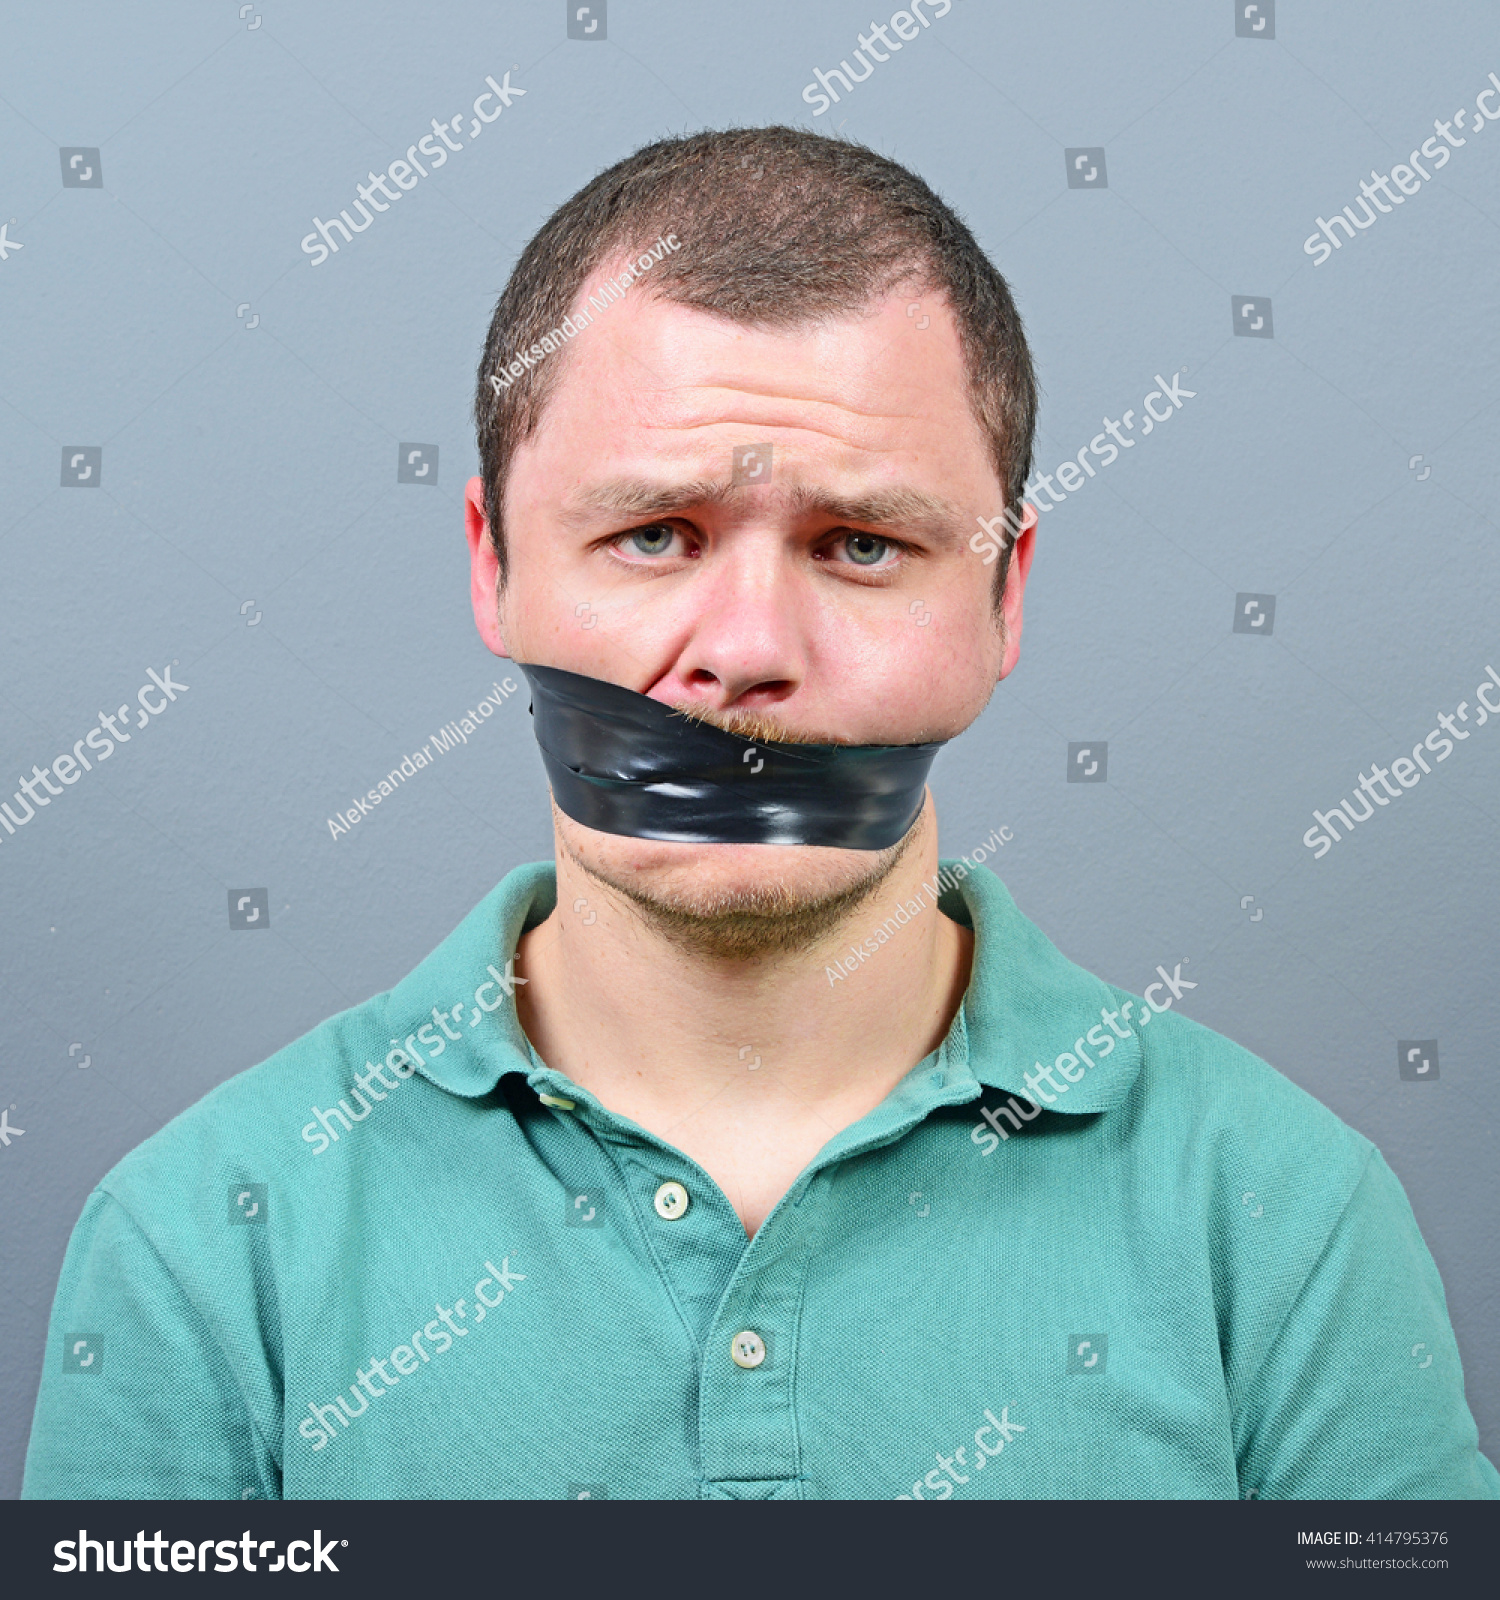 Kidnapped Man With Tape Over His Mouth Stock Photo 414795376 : Shutterstock